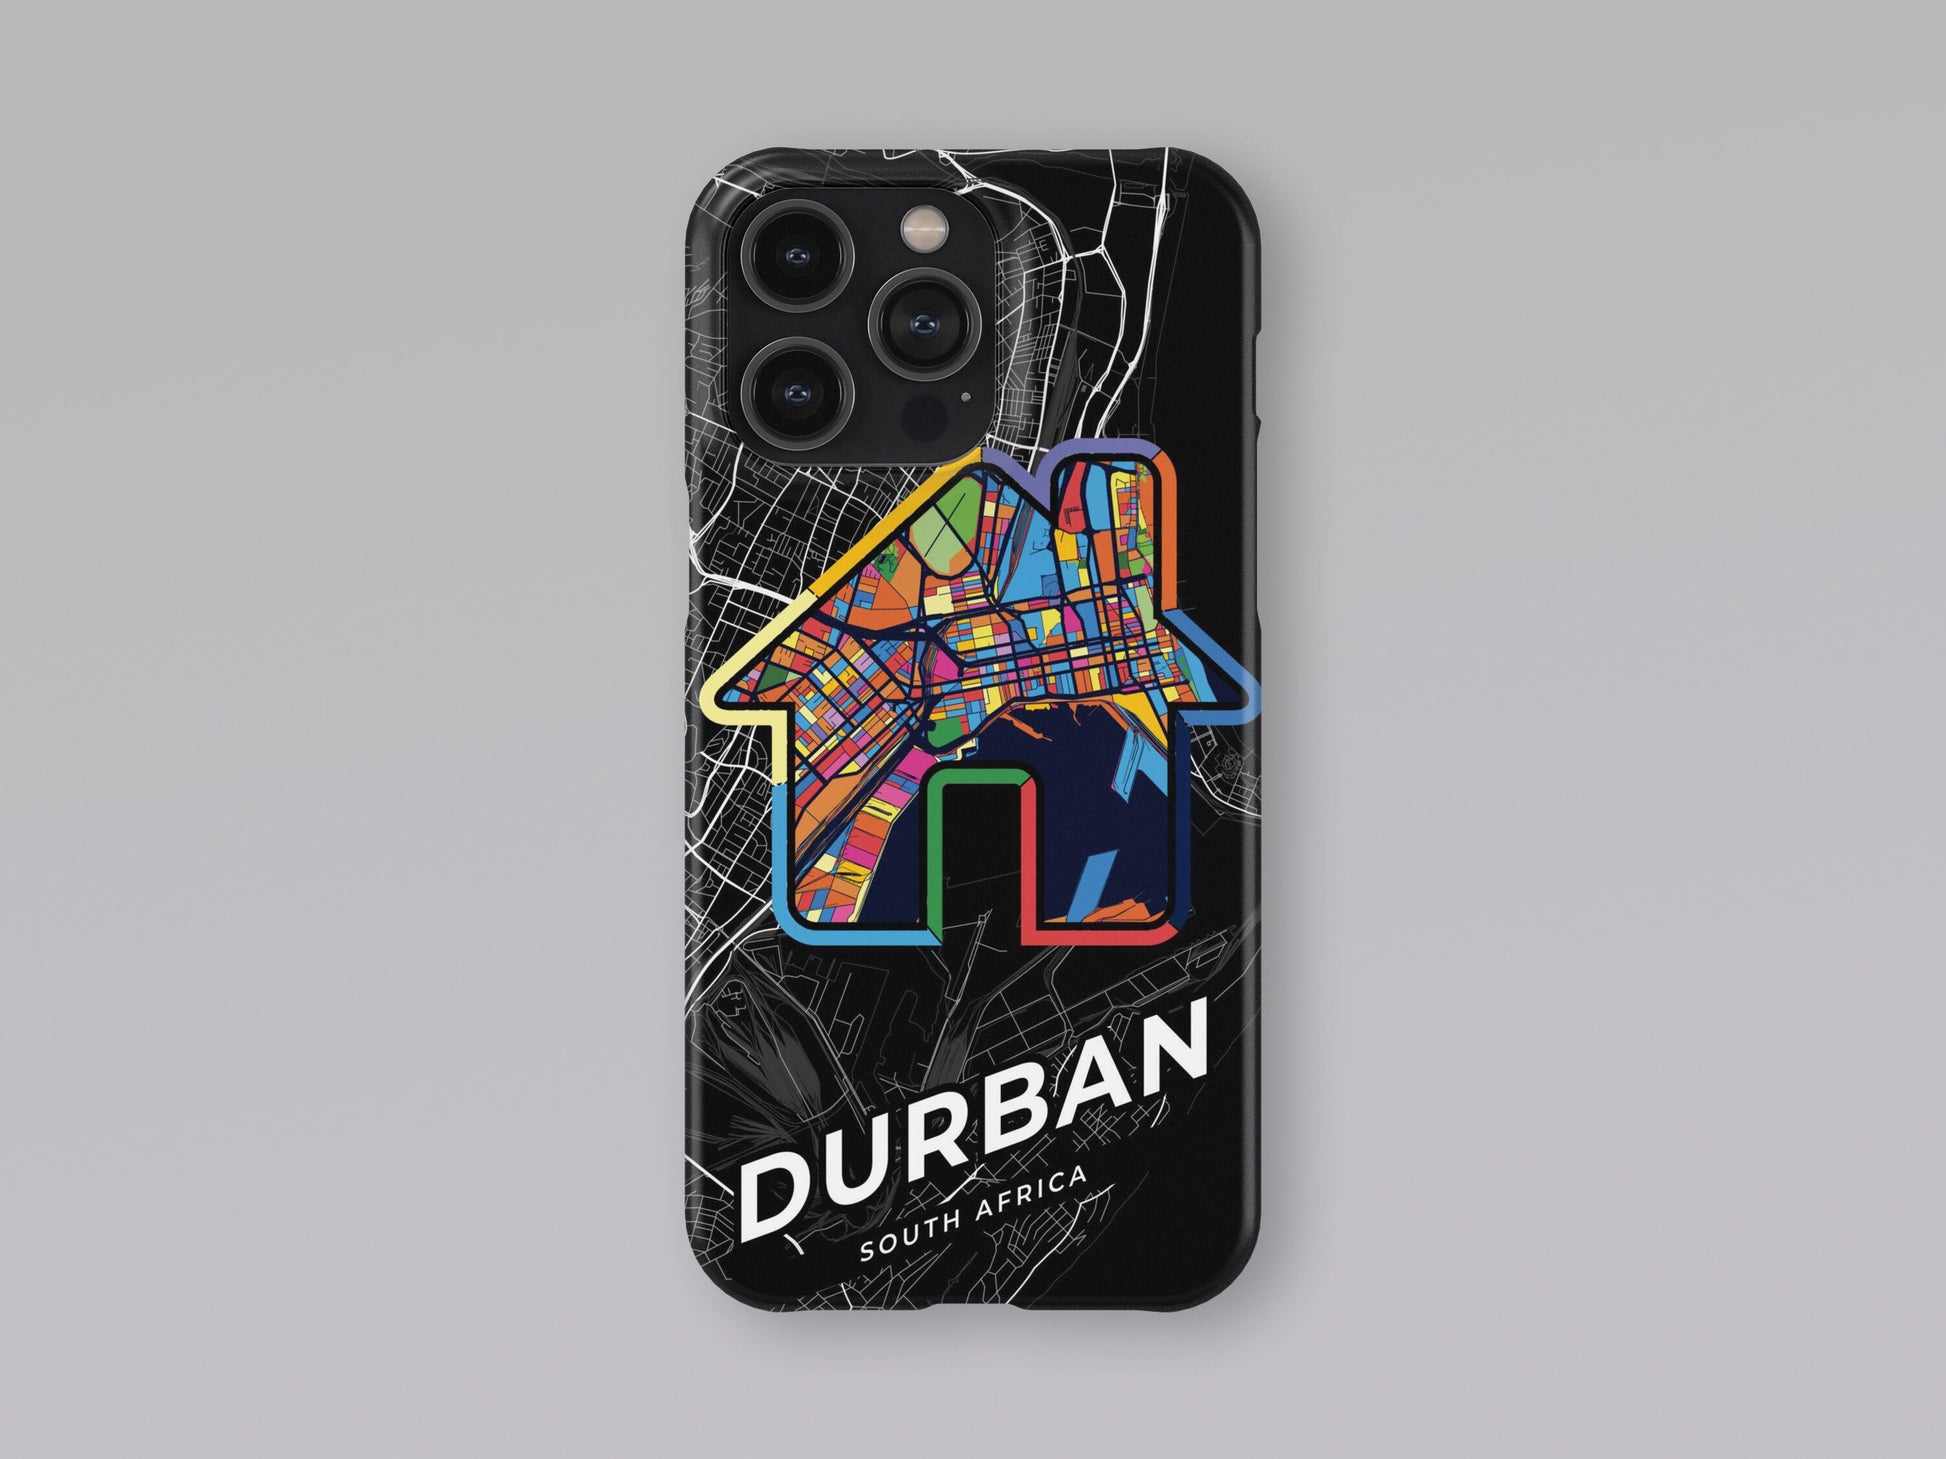 Durban South Africa slim phone case with colorful icon. Birthday, wedding or housewarming gift. Couple match cases. 3